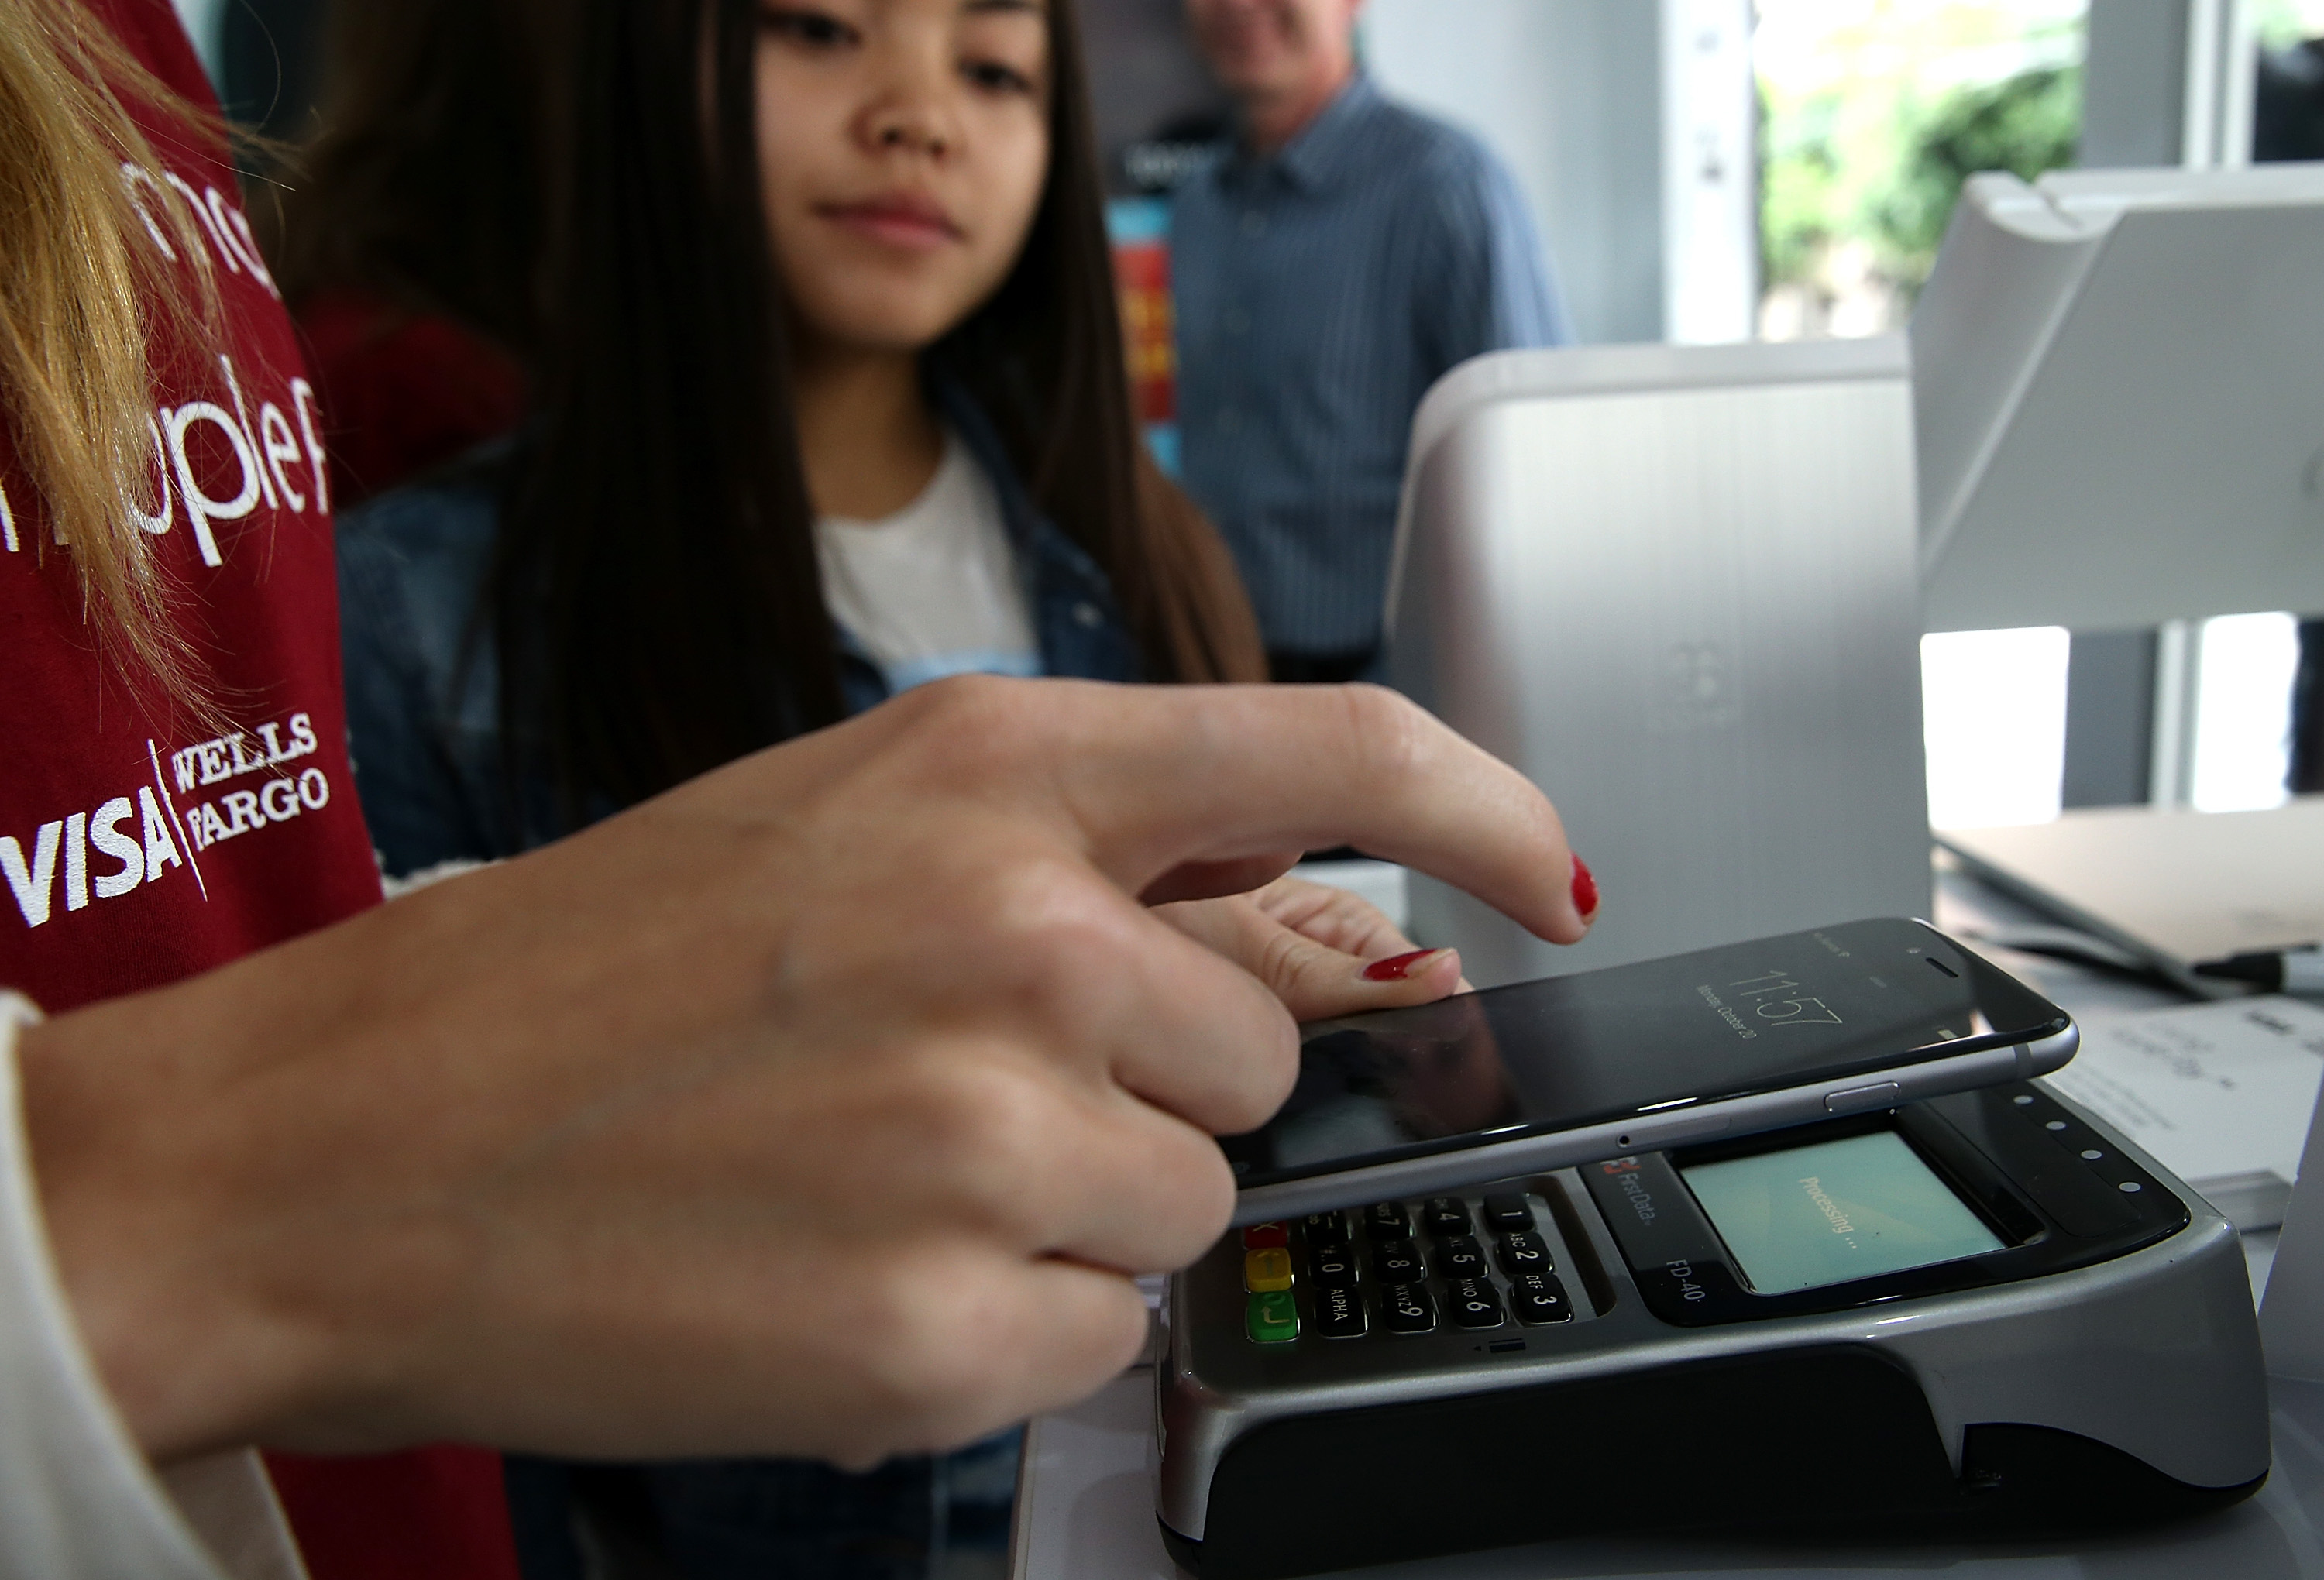 A worker demonstrates Apple Pay inside a mobile kiosk sponsored by Visa and Wells Fargo to demonstrate the new Apple Pay mobile payment system on October 20, 2014 in San Francisco City. (Justin Sullivan&mdash;Getty Images)